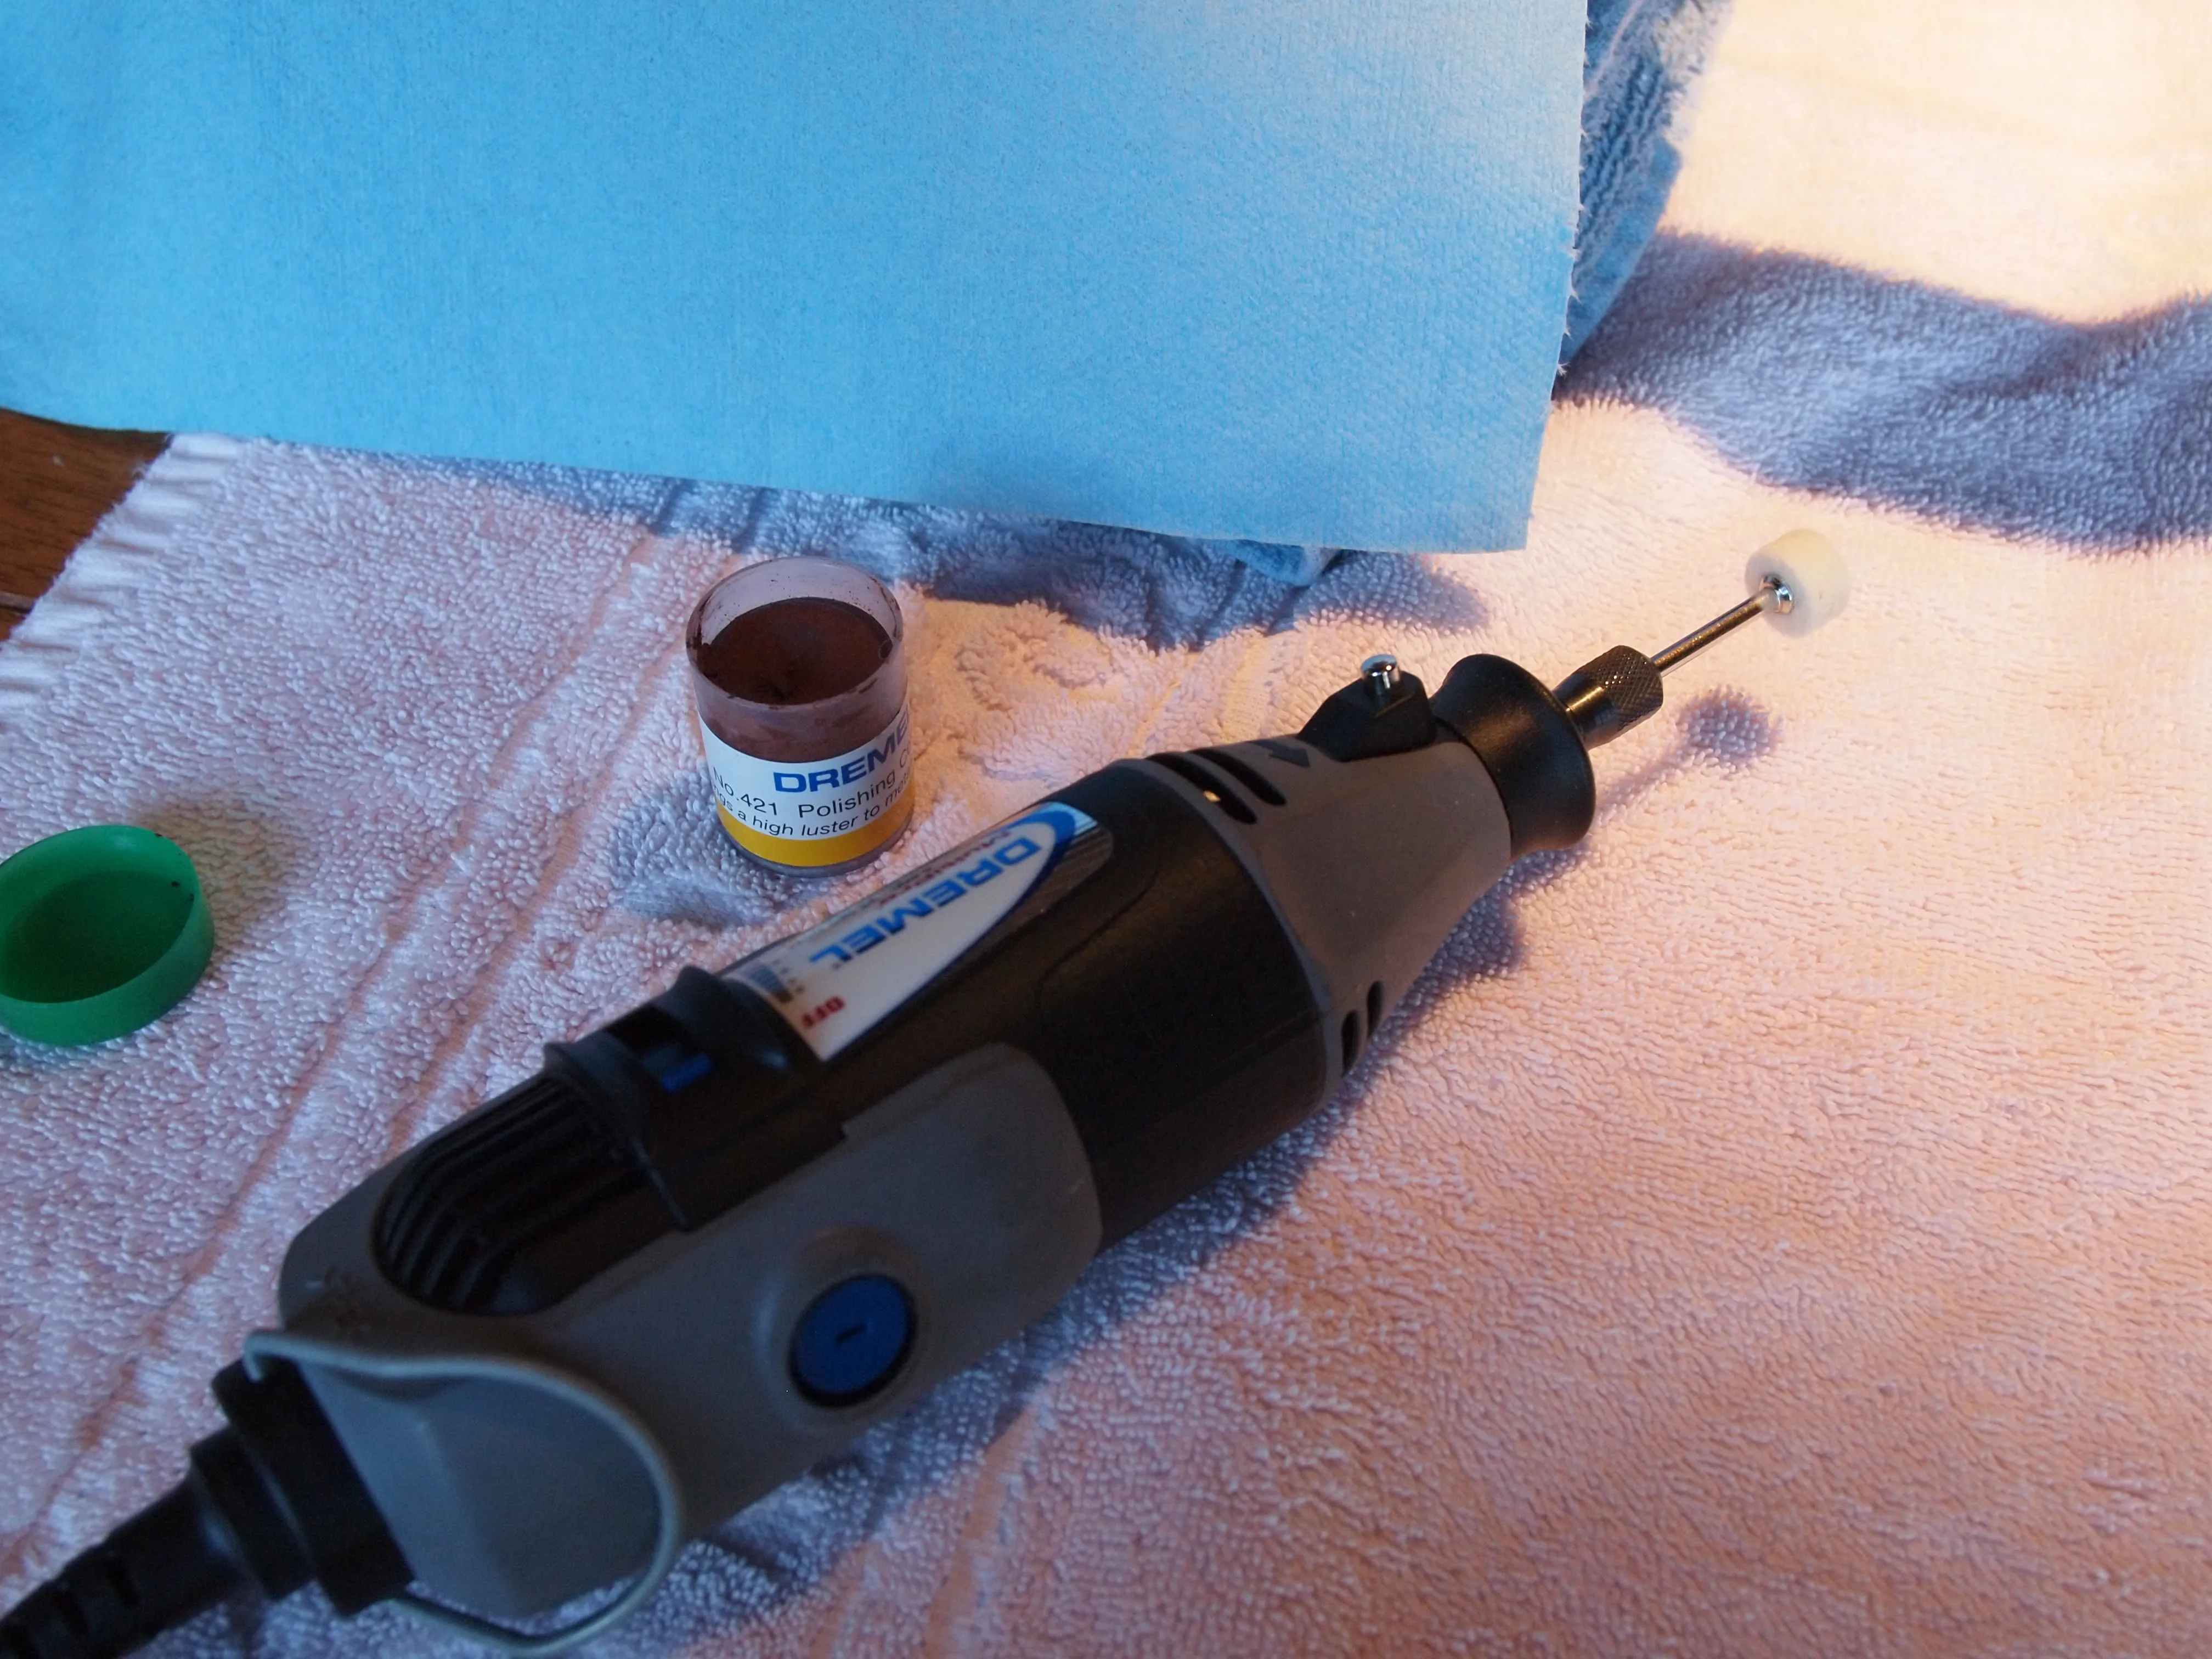 Standard Dremel Multi-Tool with the felt polishing disk and container of polishing compound.